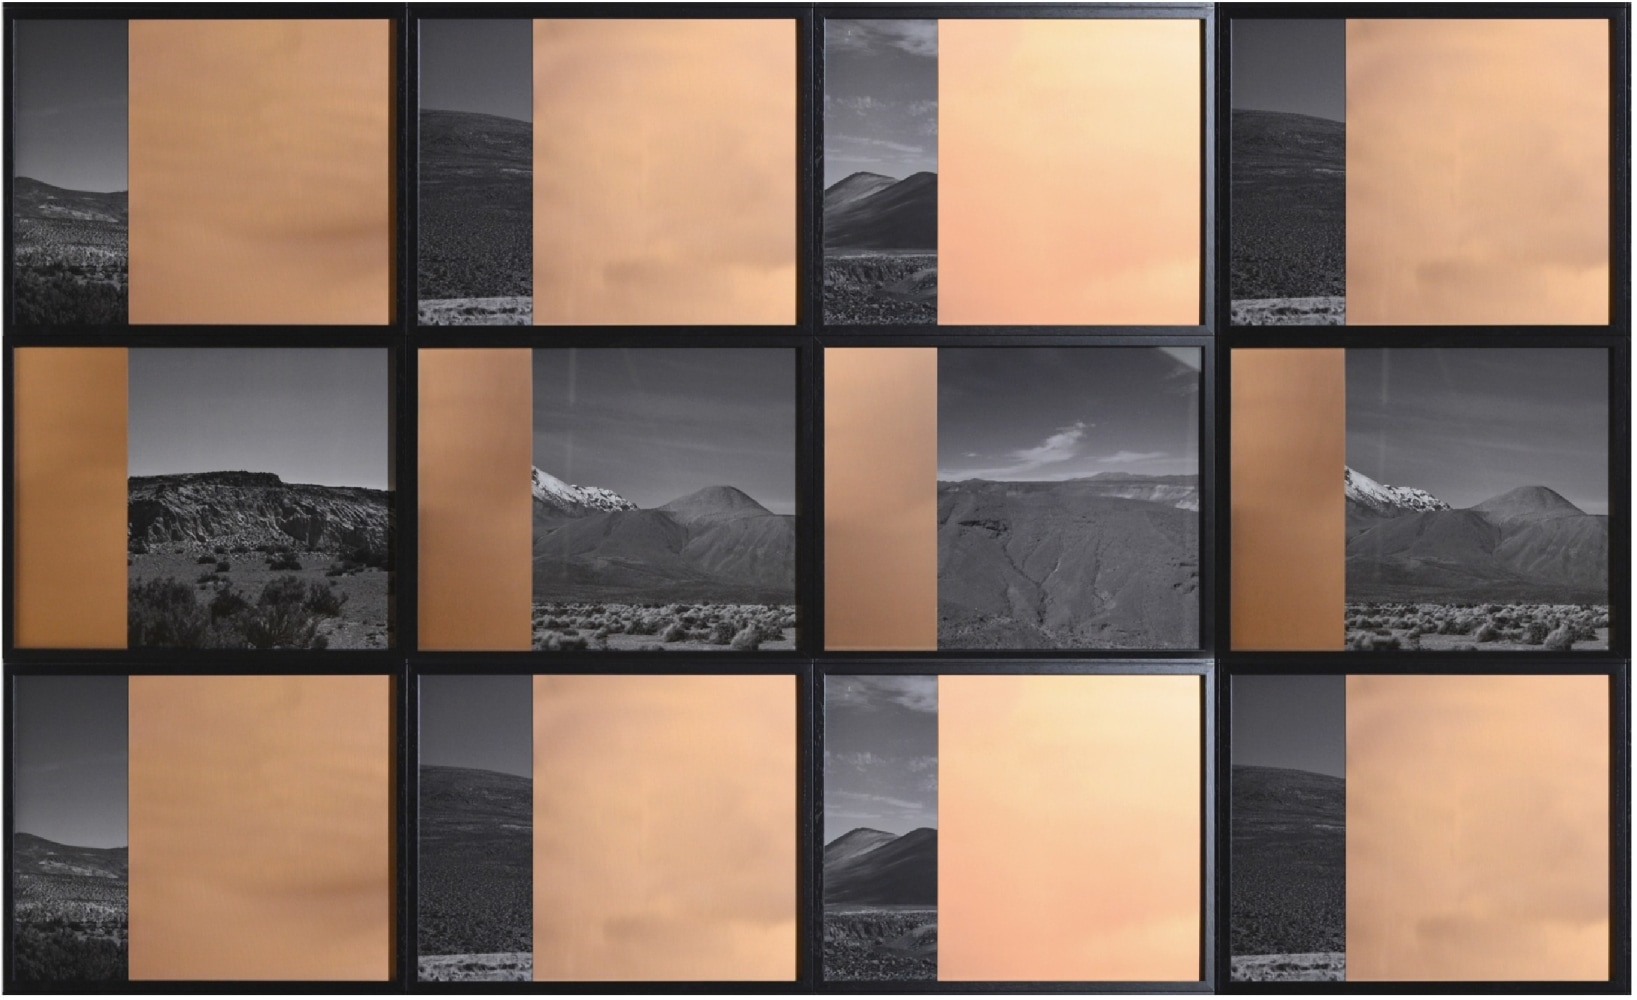 PATRICK HAMILTON

Atacama #4, 2021

Black and white photograph, copper plate, wood, frame

126h x 208w cm

49 77/127h x 81 113/127w in

Edition 1 of 2